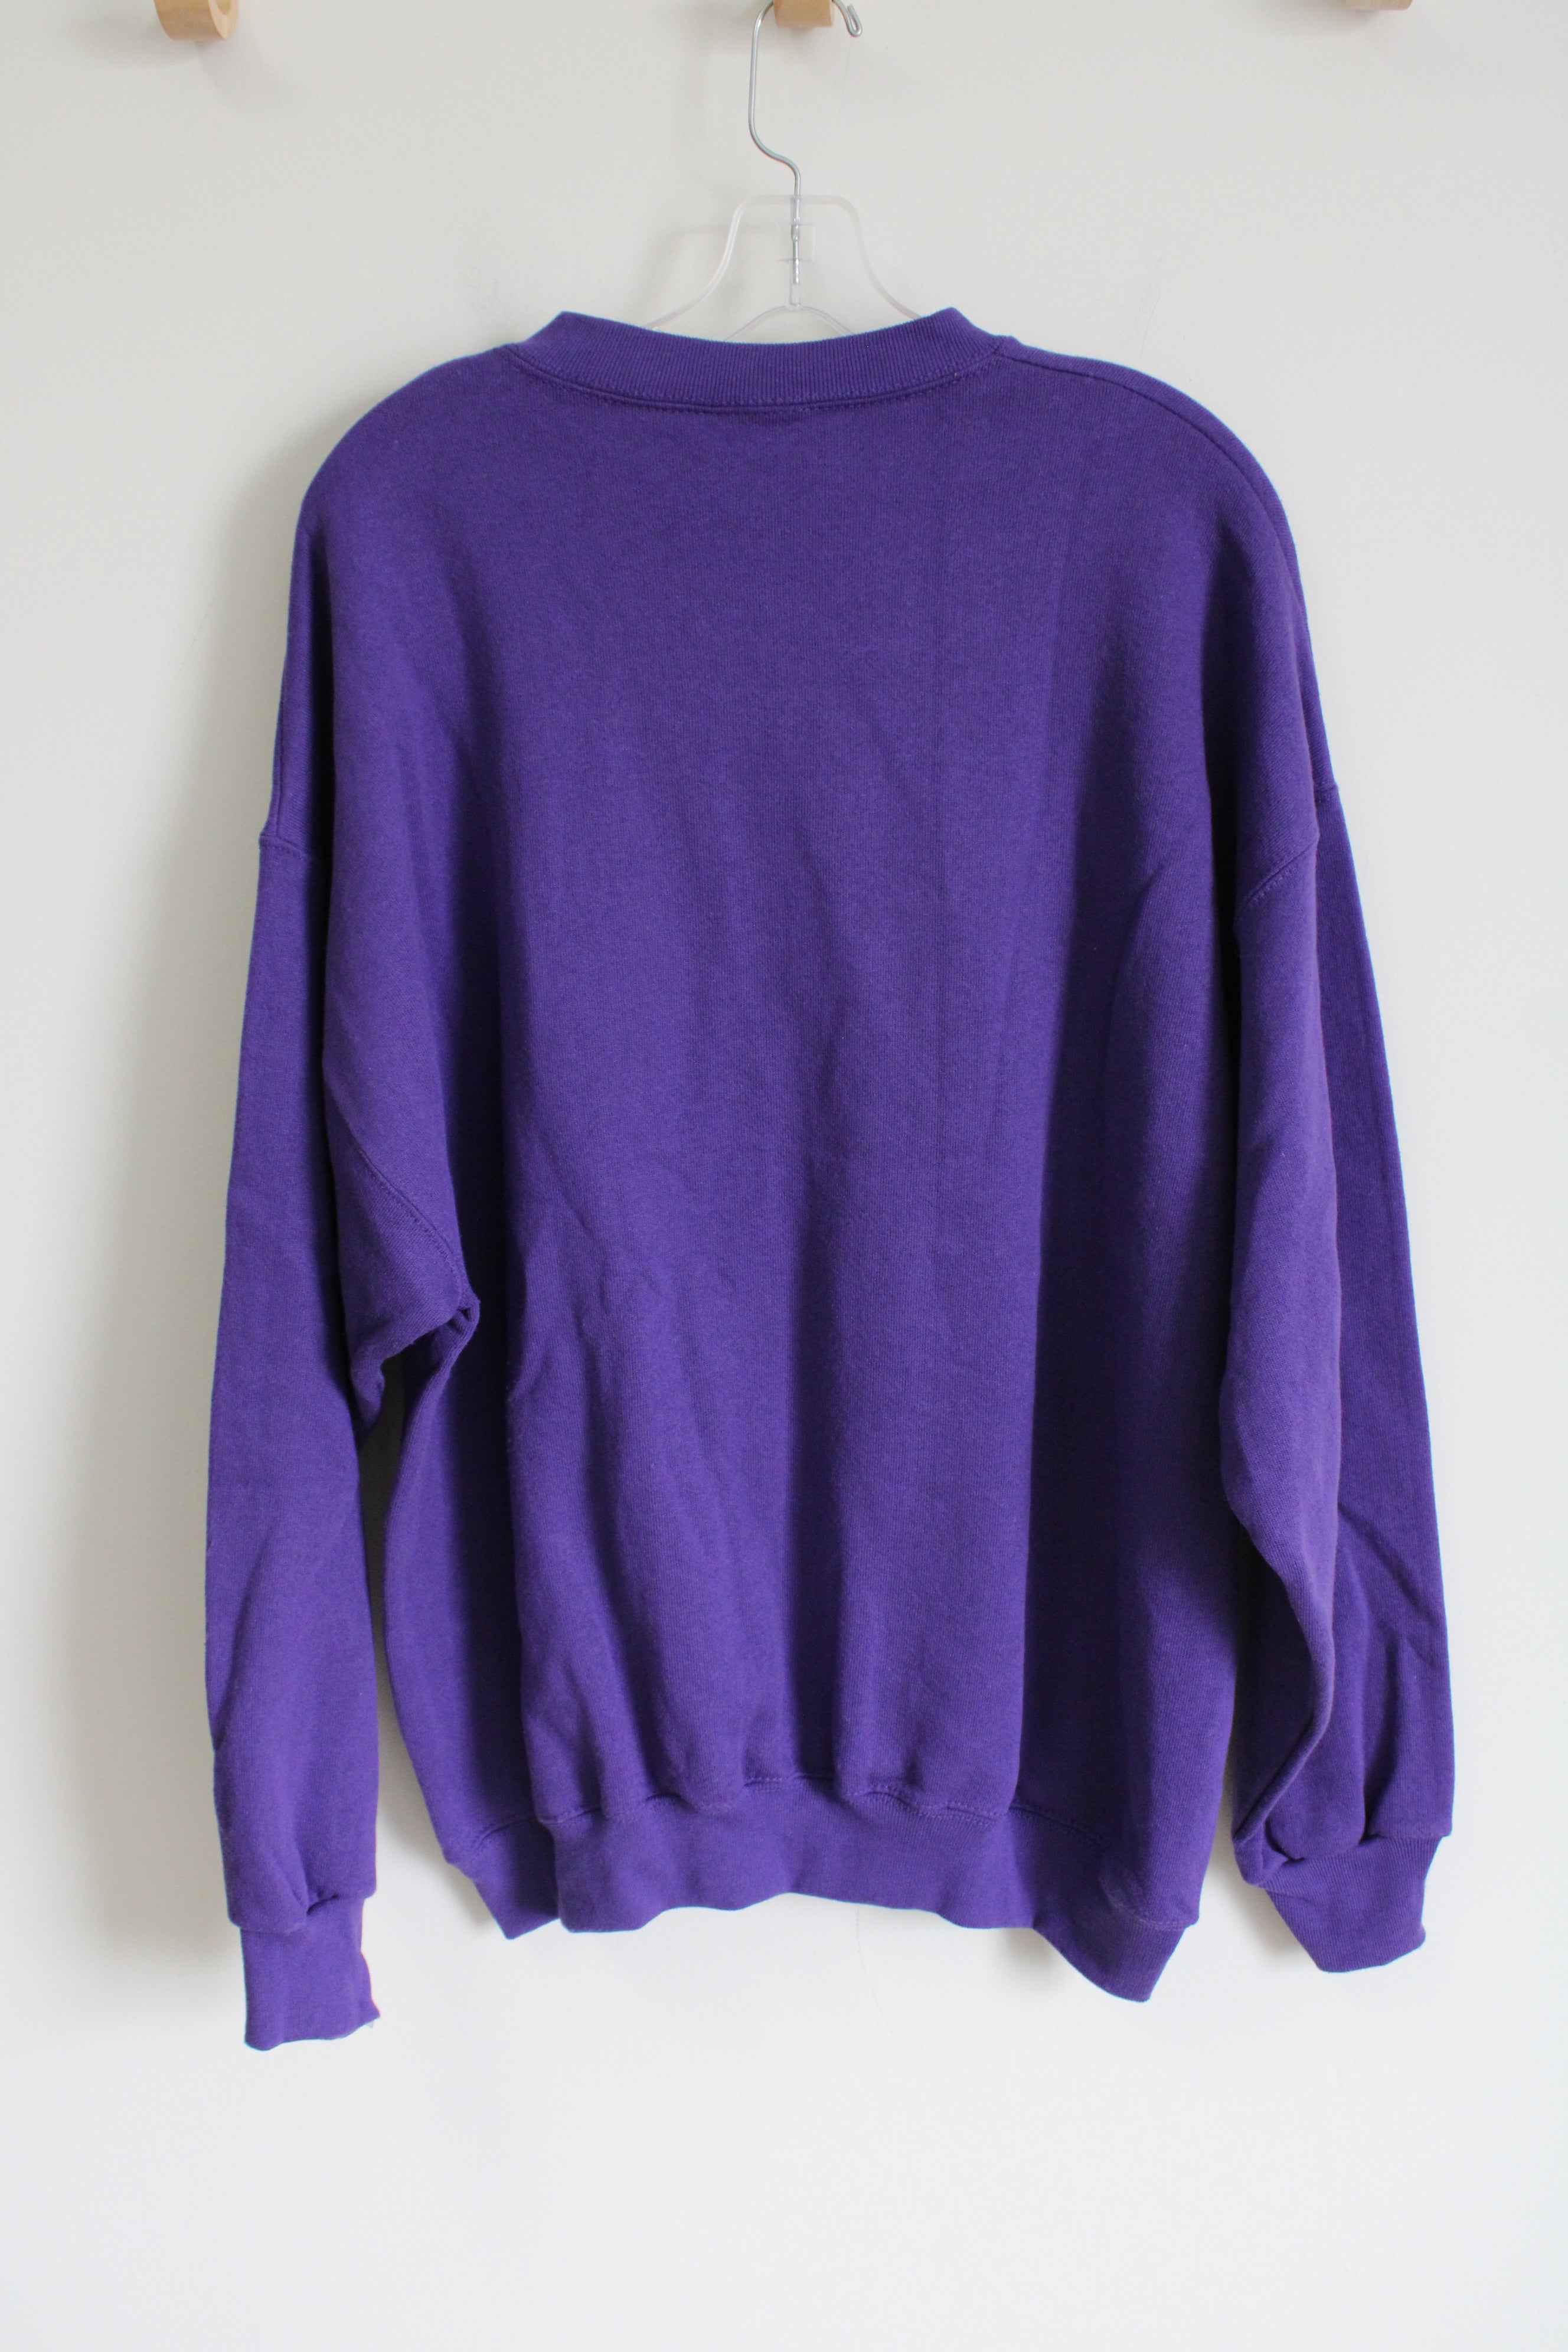 NEW Vintage Mickey & Co. Mickey Mouse Embroidered Purple Sweatshirt | XL